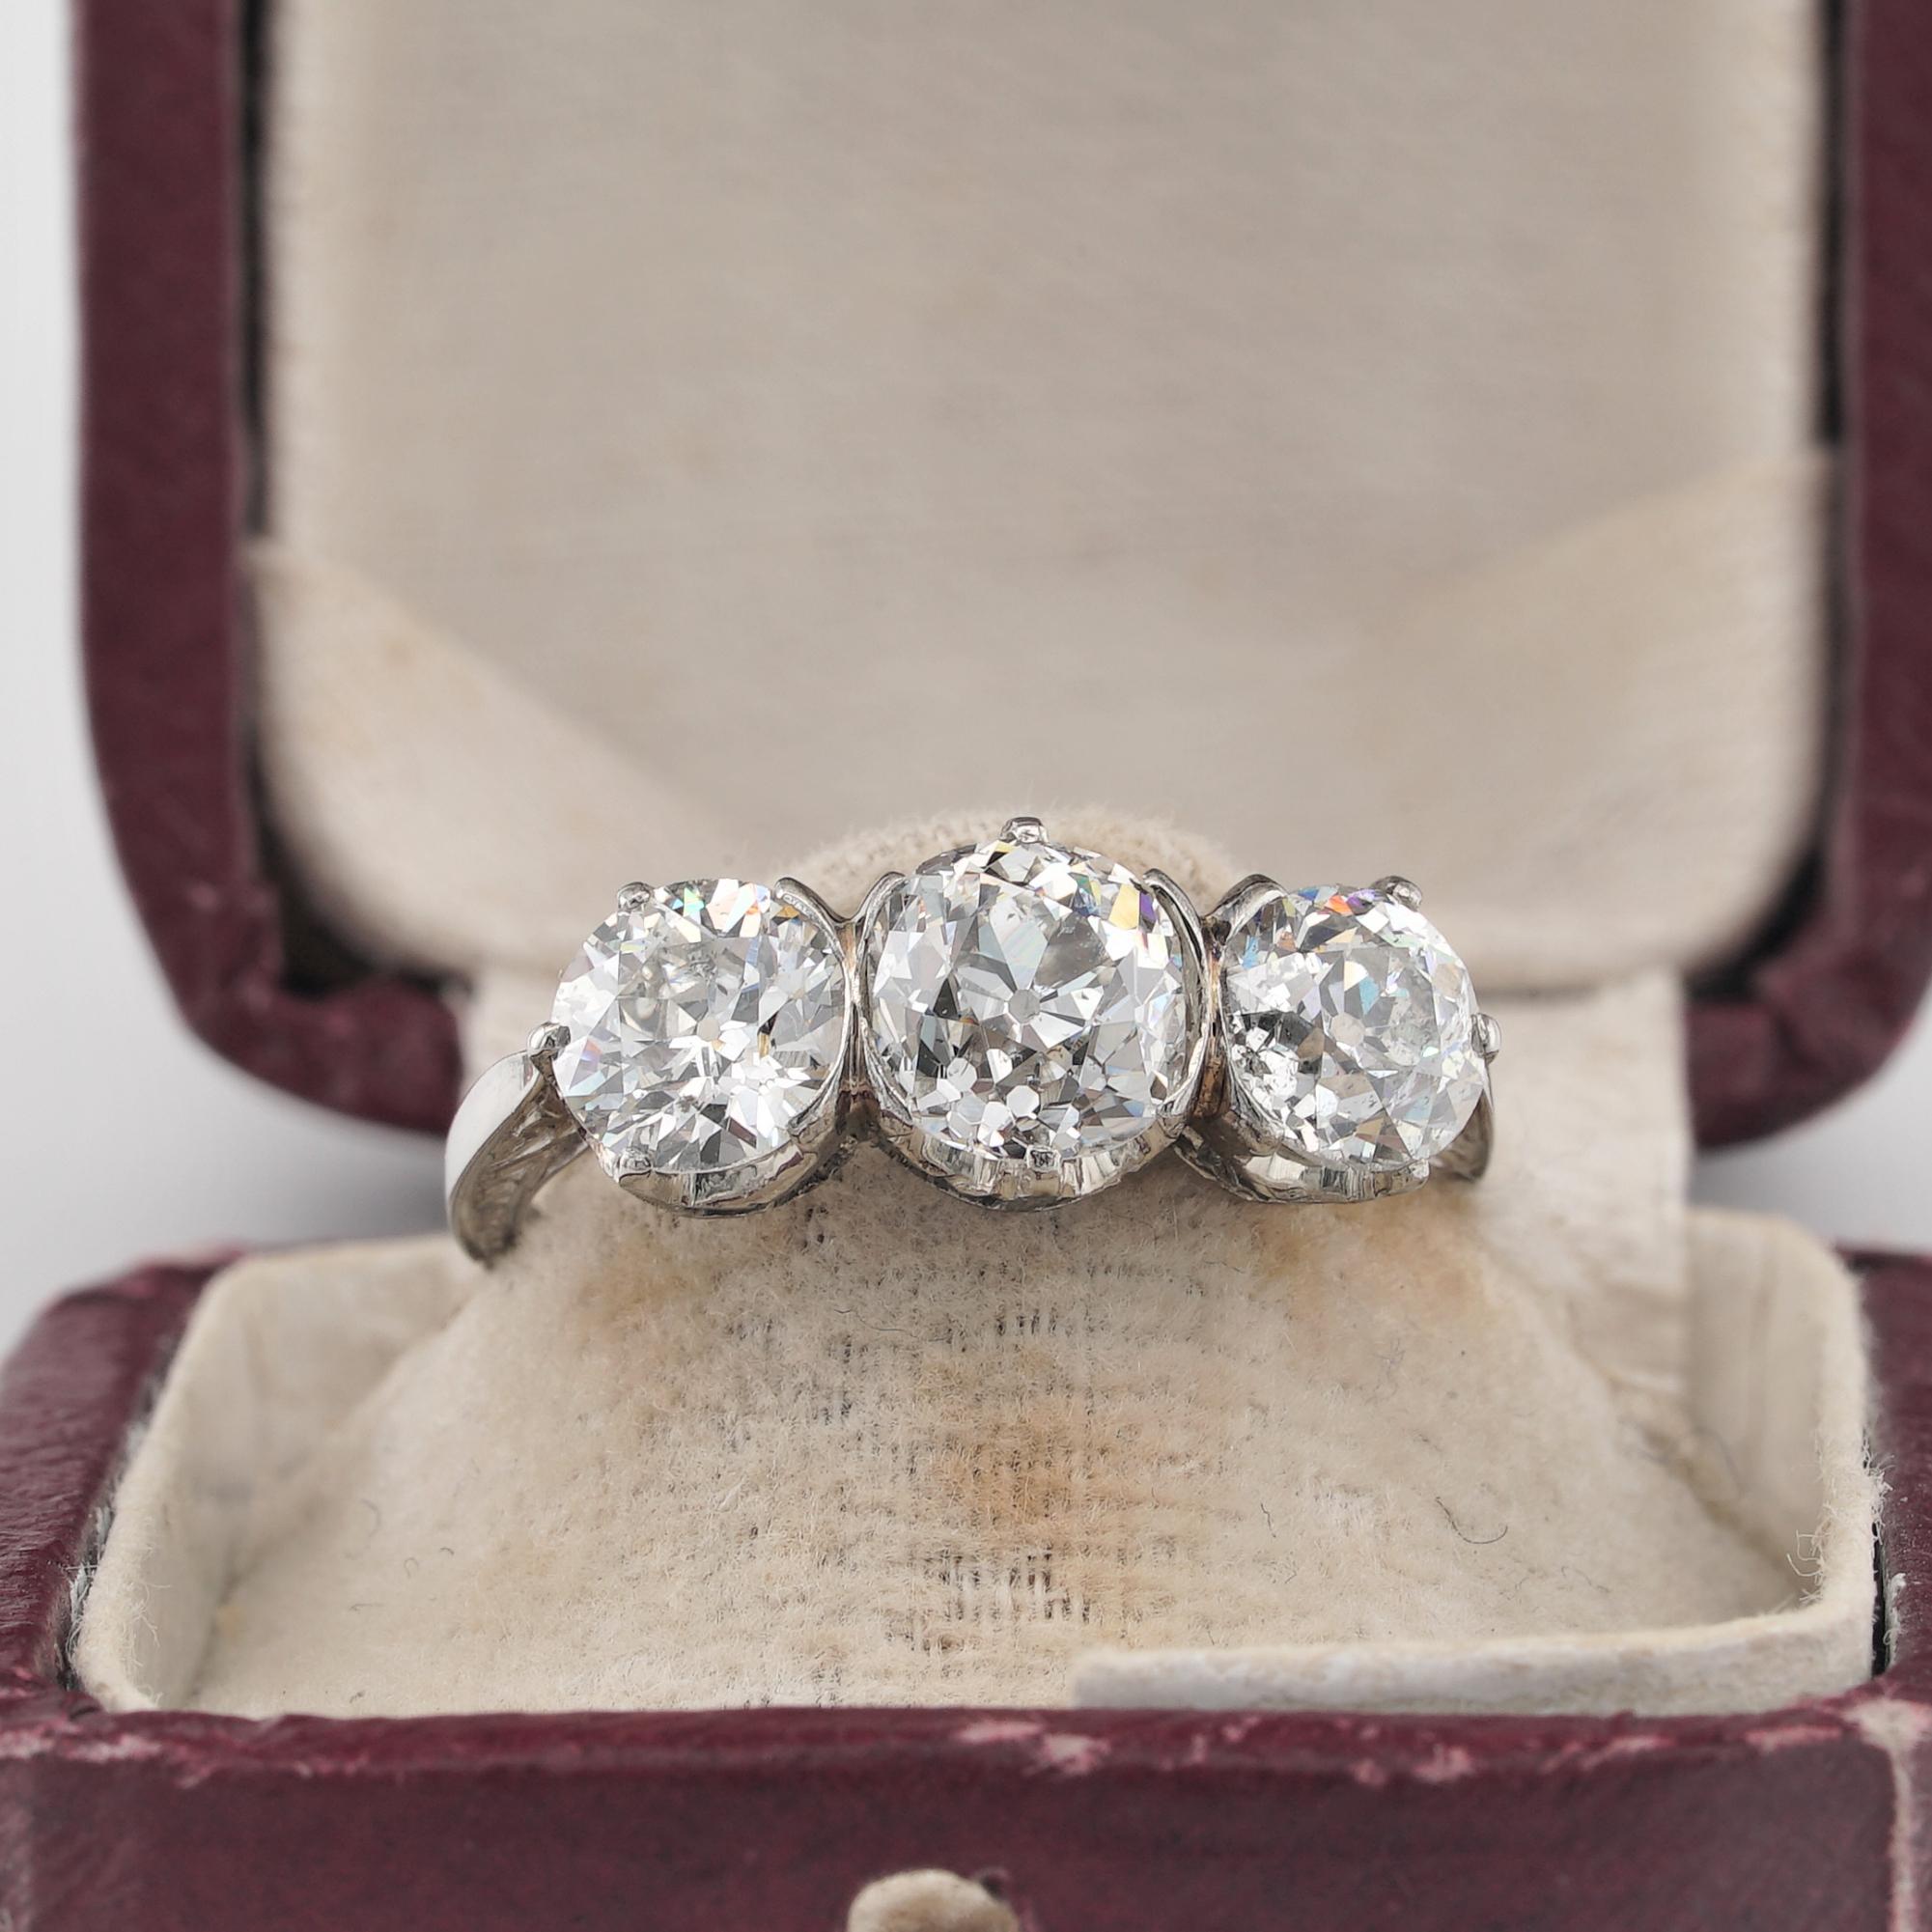 For Ever
Breathtaking, original Edwardian period three stone Diamond ring, 1900/09 ca
Superbly hand crafted mounting finely executed of solid 18 Kt white gold, detailed with leaf work as typical expression of the era
It faces up with a tantalizing